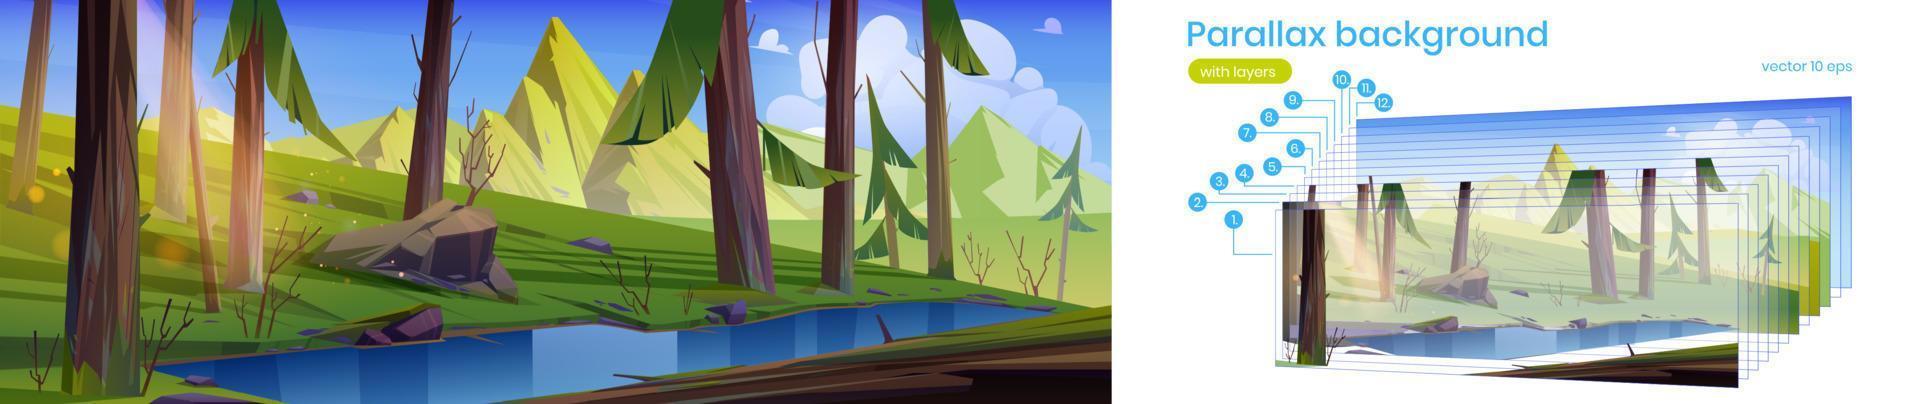 Parallax background coniferous forest with lake vector